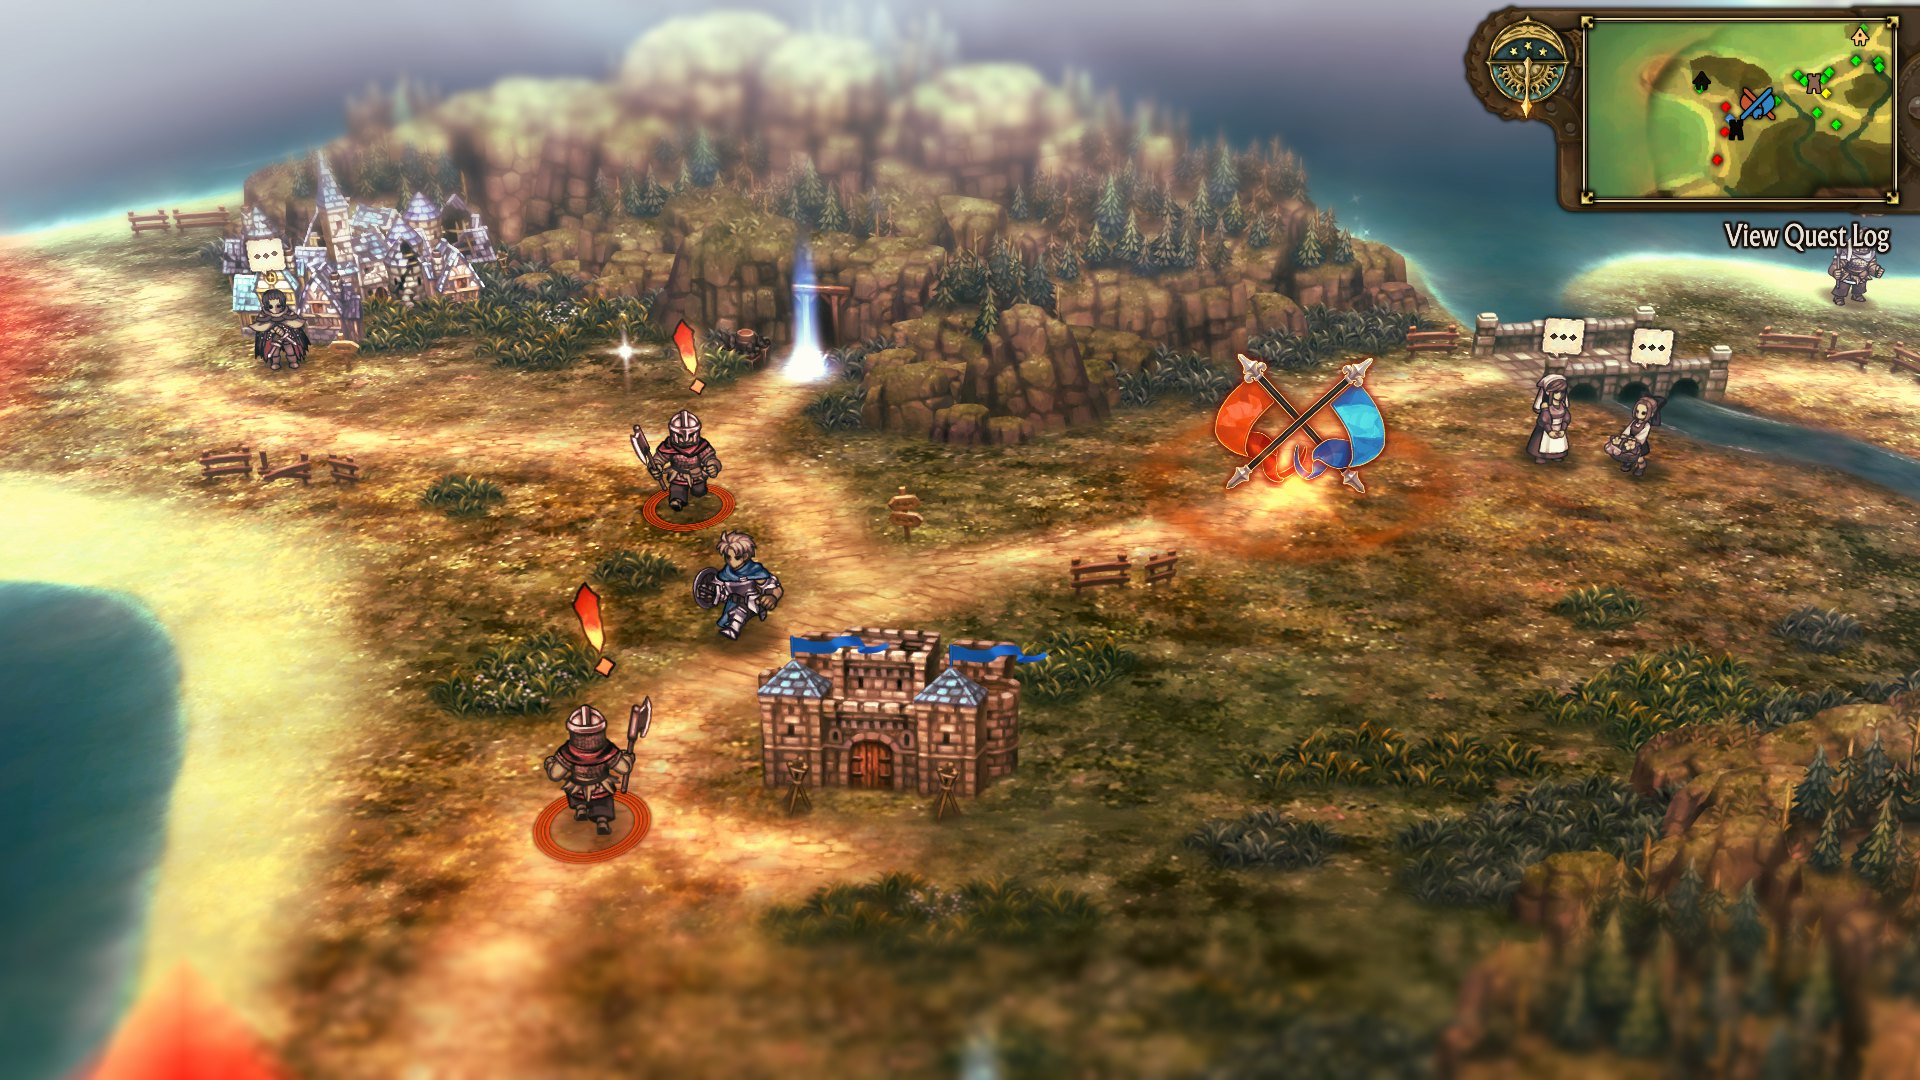 Vanillaware Announces New Tactical RPG Unicorn Overlord, Set to